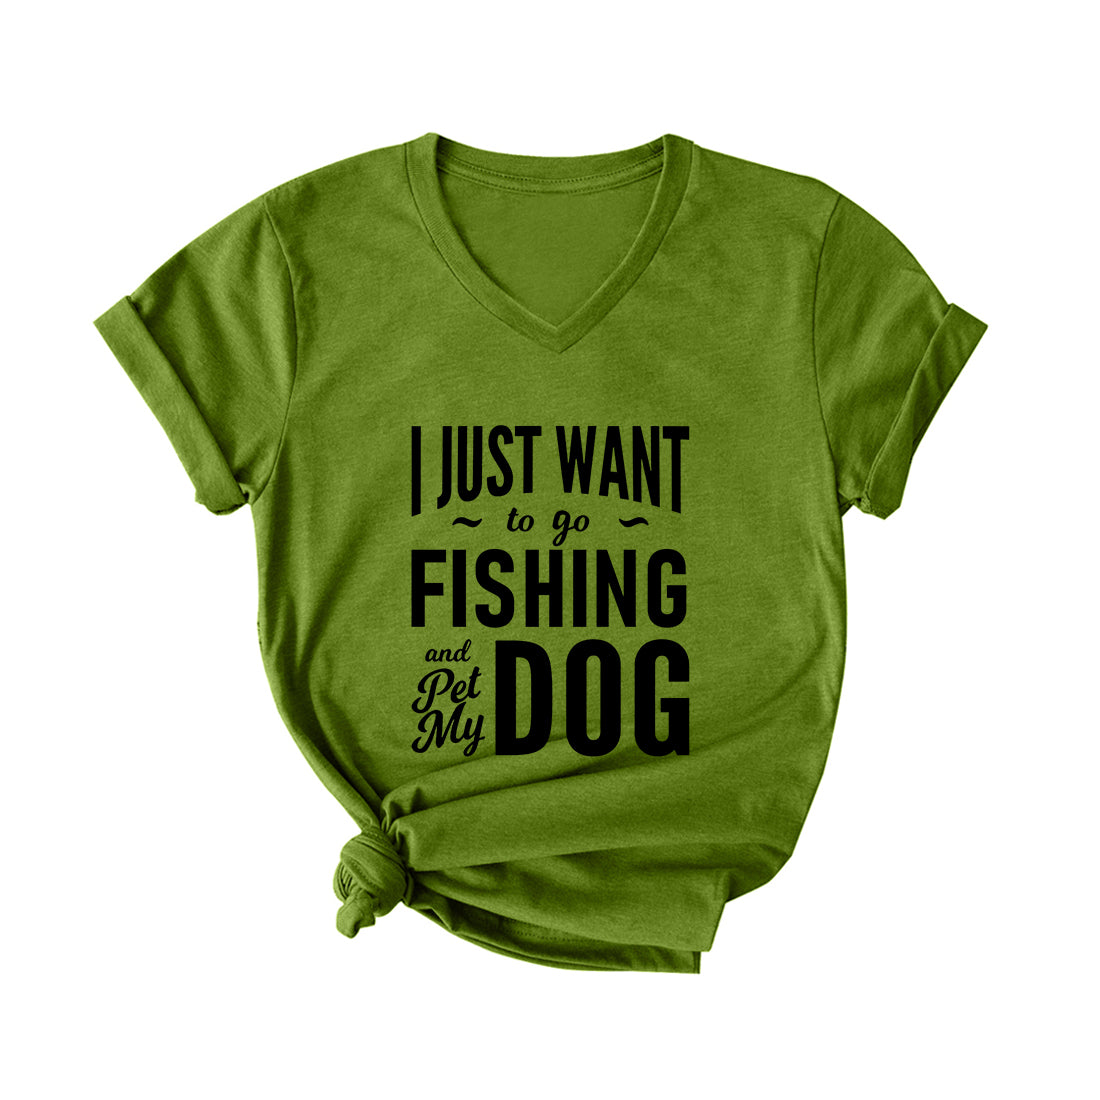 I JUST WANT TO GO FISHING AND PET MY DOG V Neck T-Shirt for Women